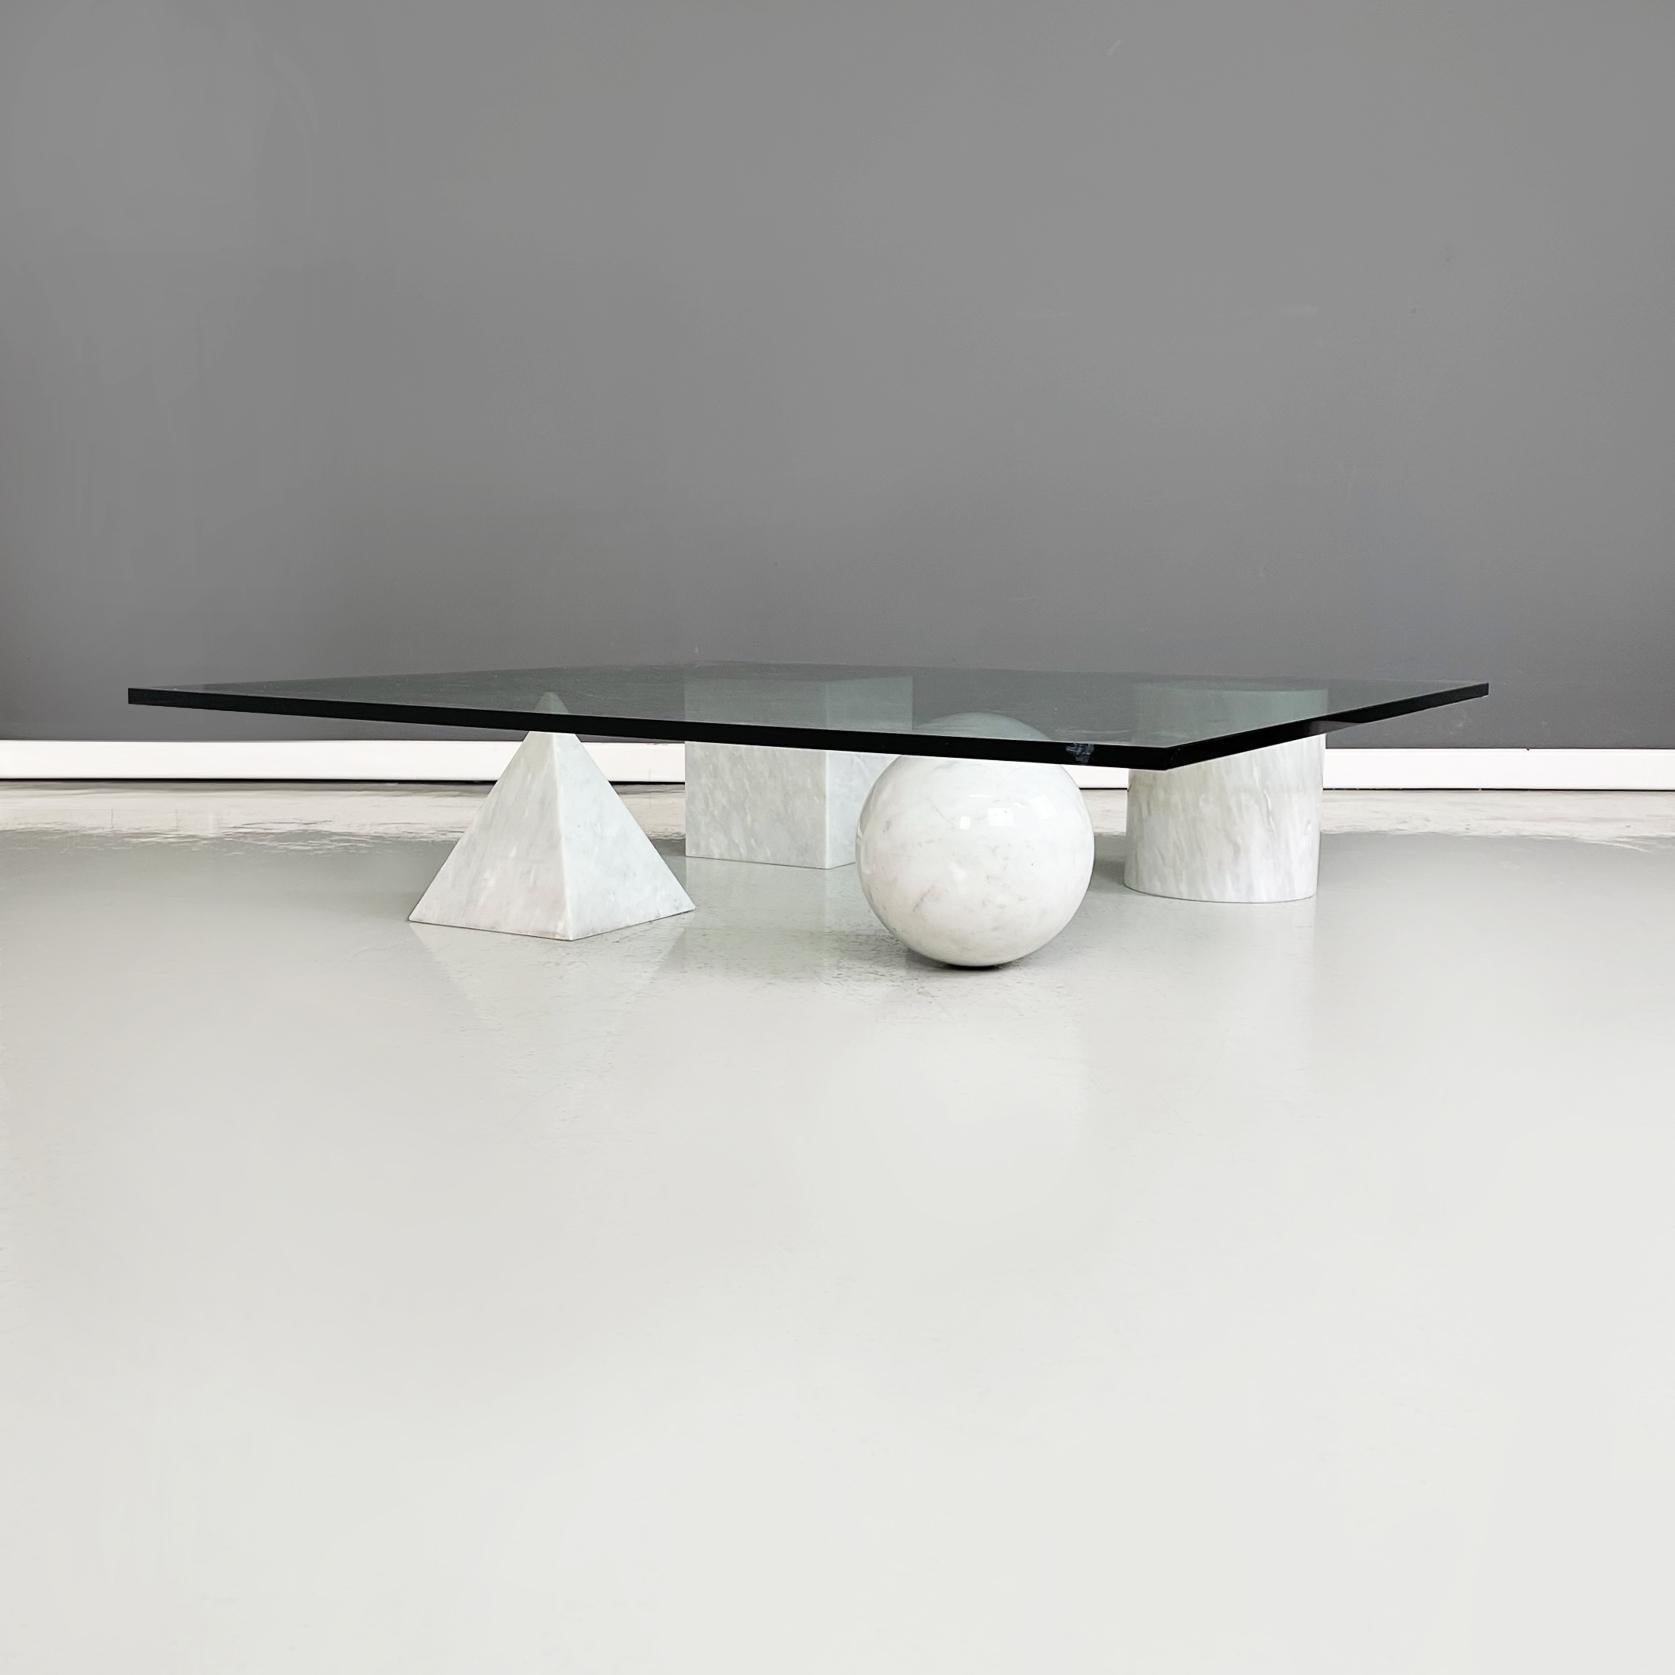 Italy modern Coffe table Metafora by Massimo and Lella Vignelli for Casigliani, 1980s
Coffee table mod. Metafora with square top in thick aquamarine green glass. The 4 legs are made up of 4 geometric shapes in white marble: sphere, cylinder, cube